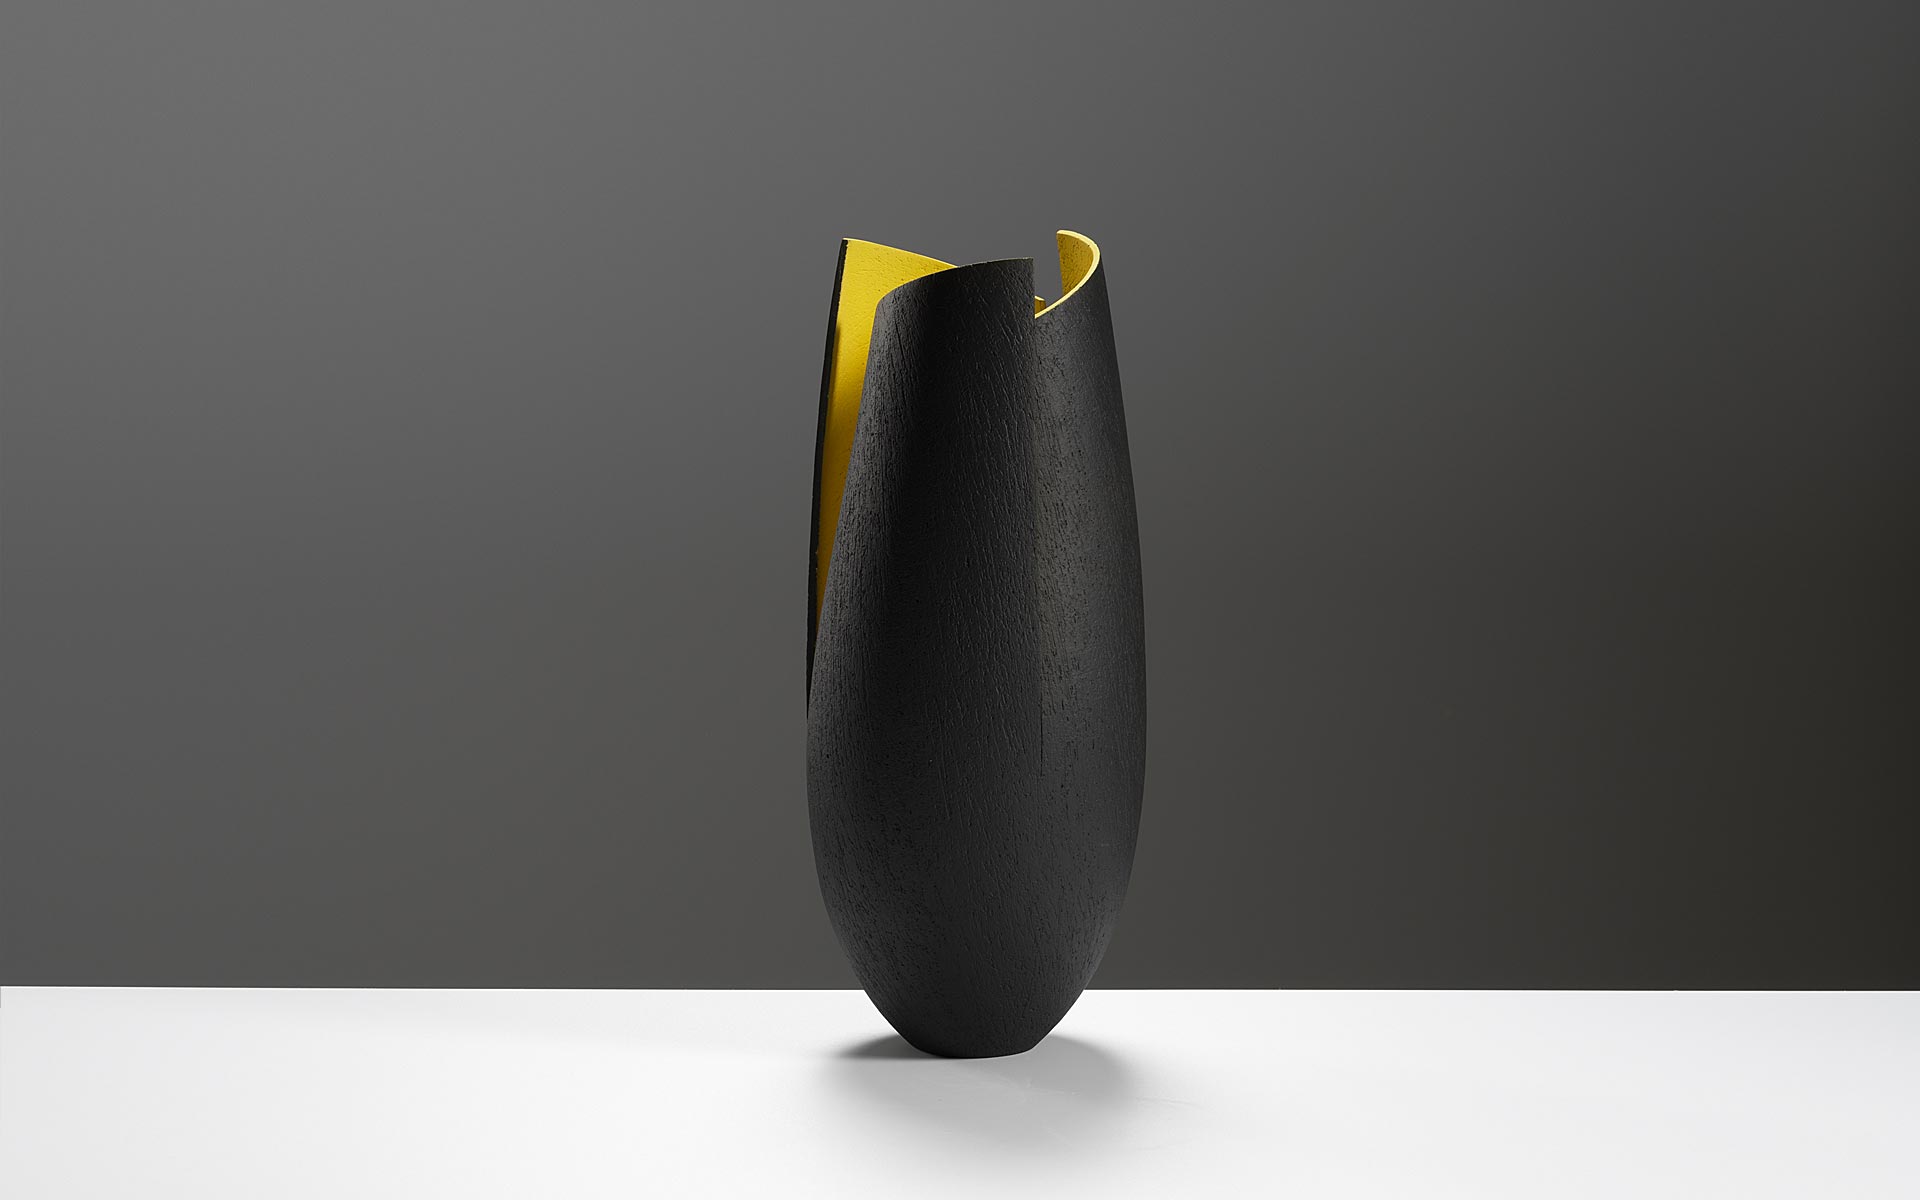 Slim cut and altered black vessel with yellow interior